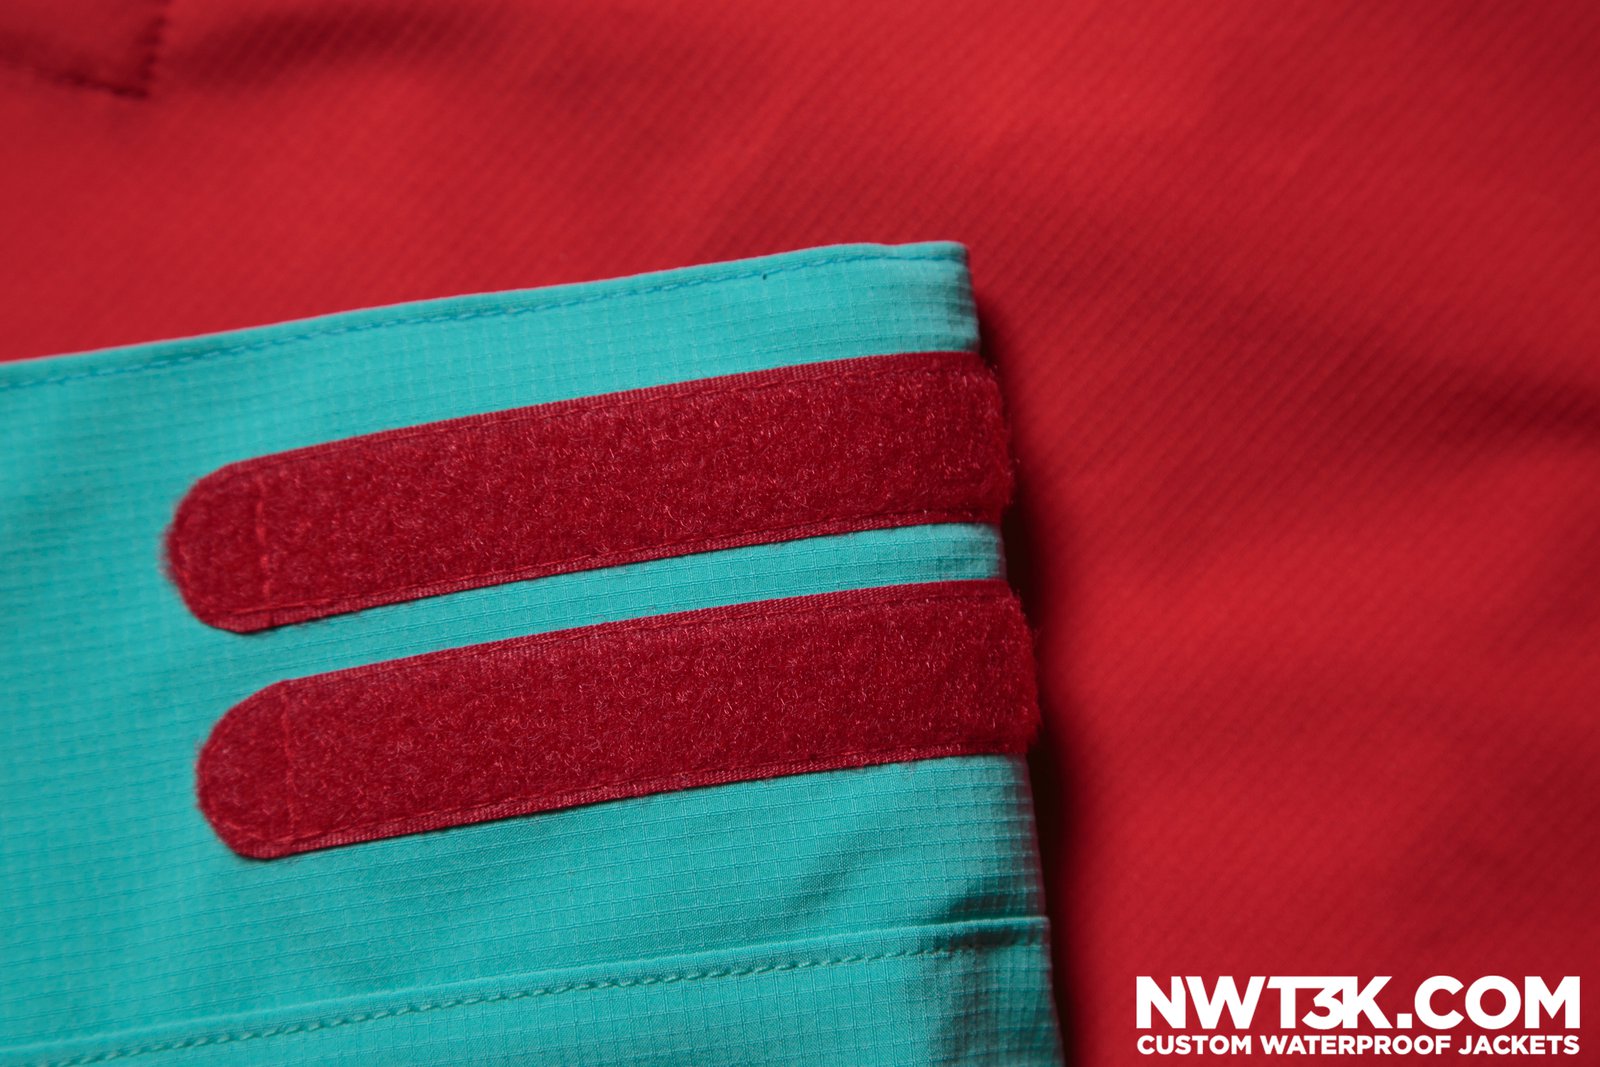 red velcro on teal arm | NWT3K.com